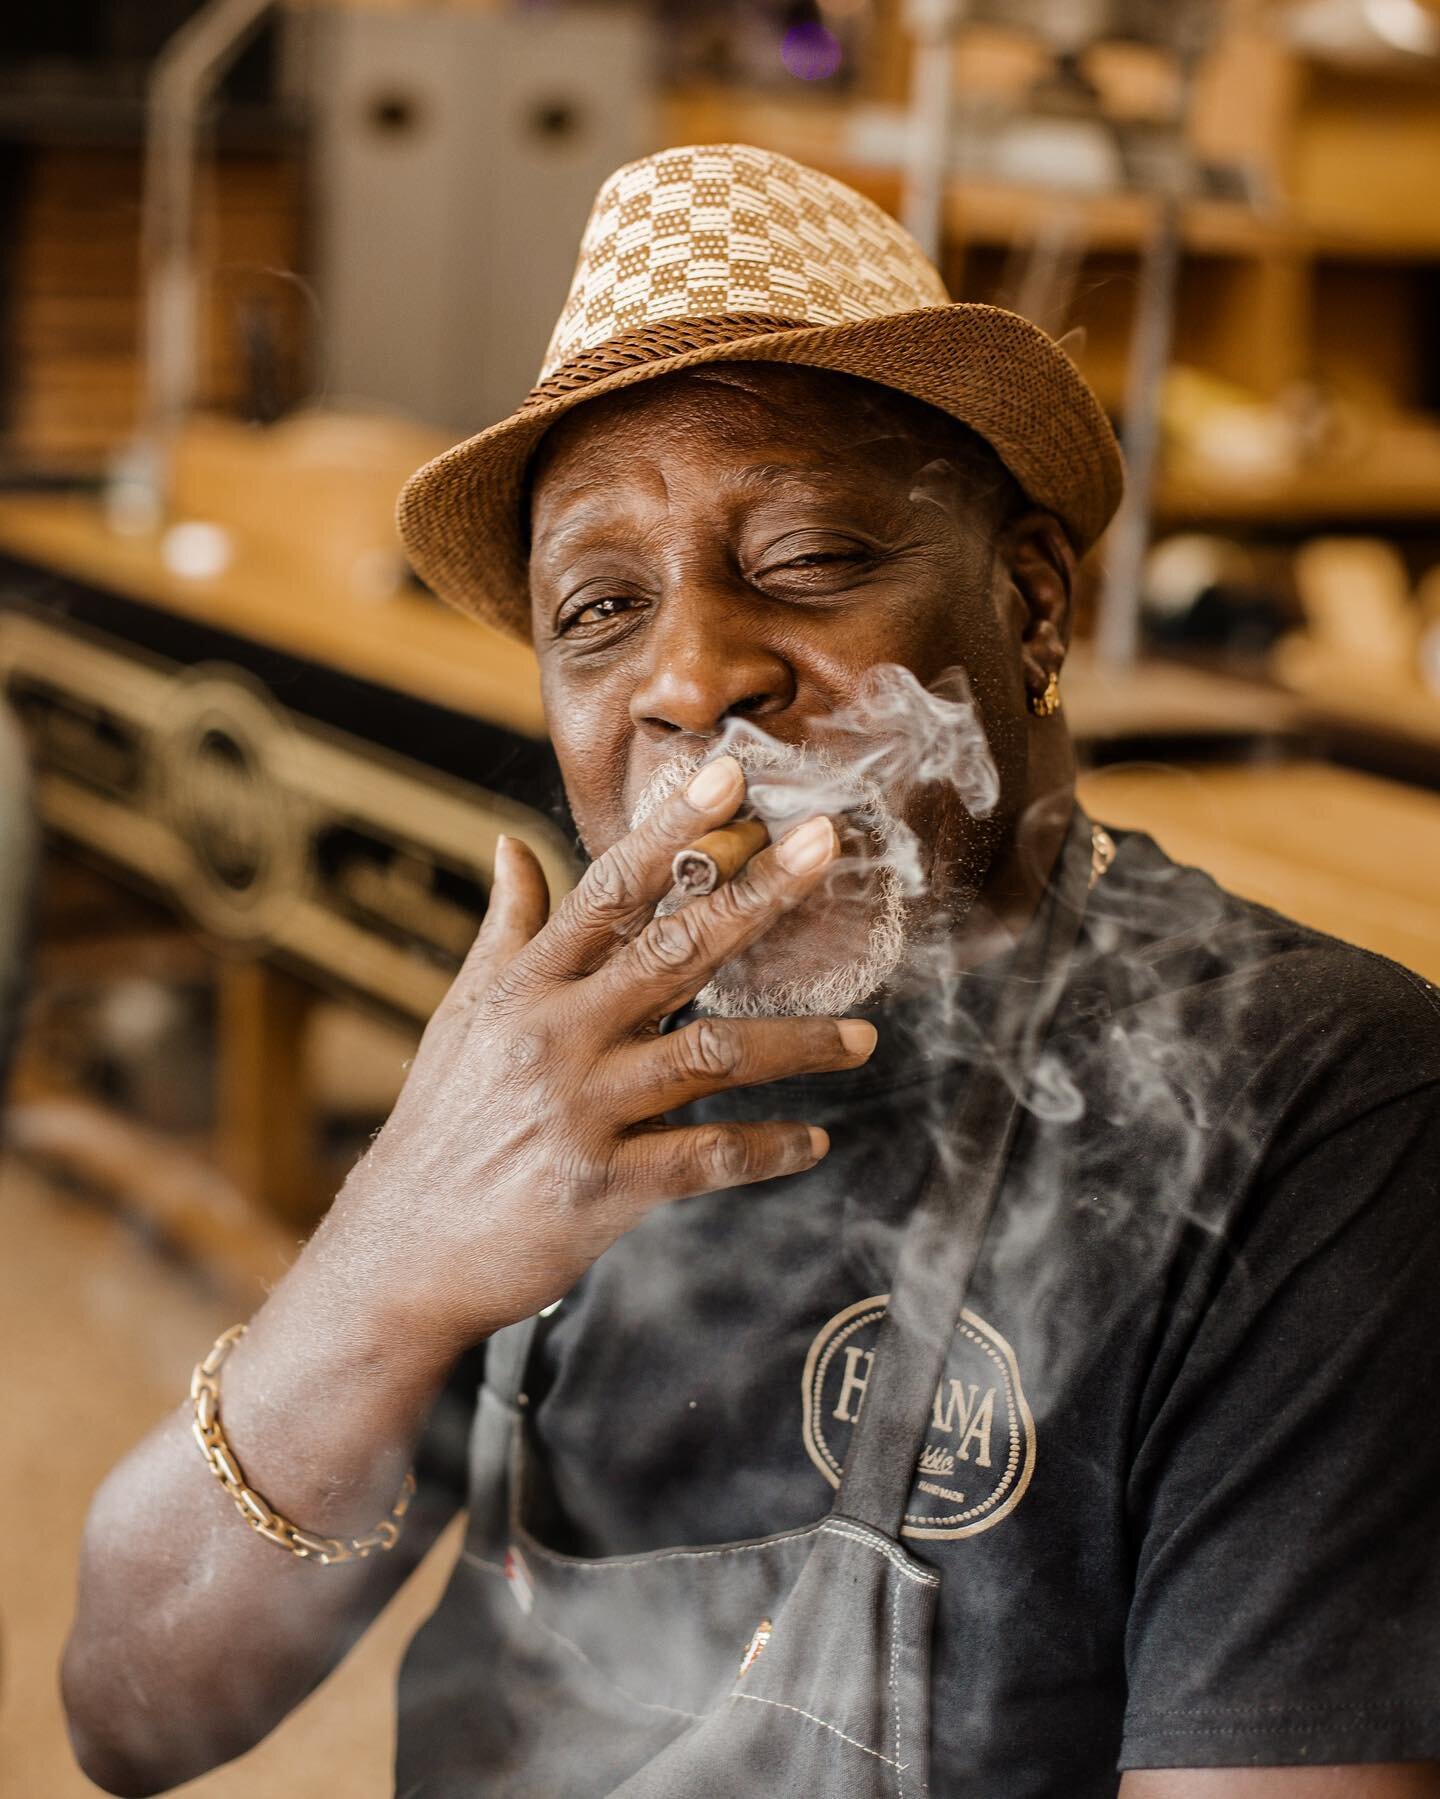 Take a step back in time with me to Little Havana, Miami, where I had the privilege of capturing the art of hand-rolled cigars. Meet Roberto, a master of his craft who has been rolling cigars by hand for years. His passion and skill are evident in ev